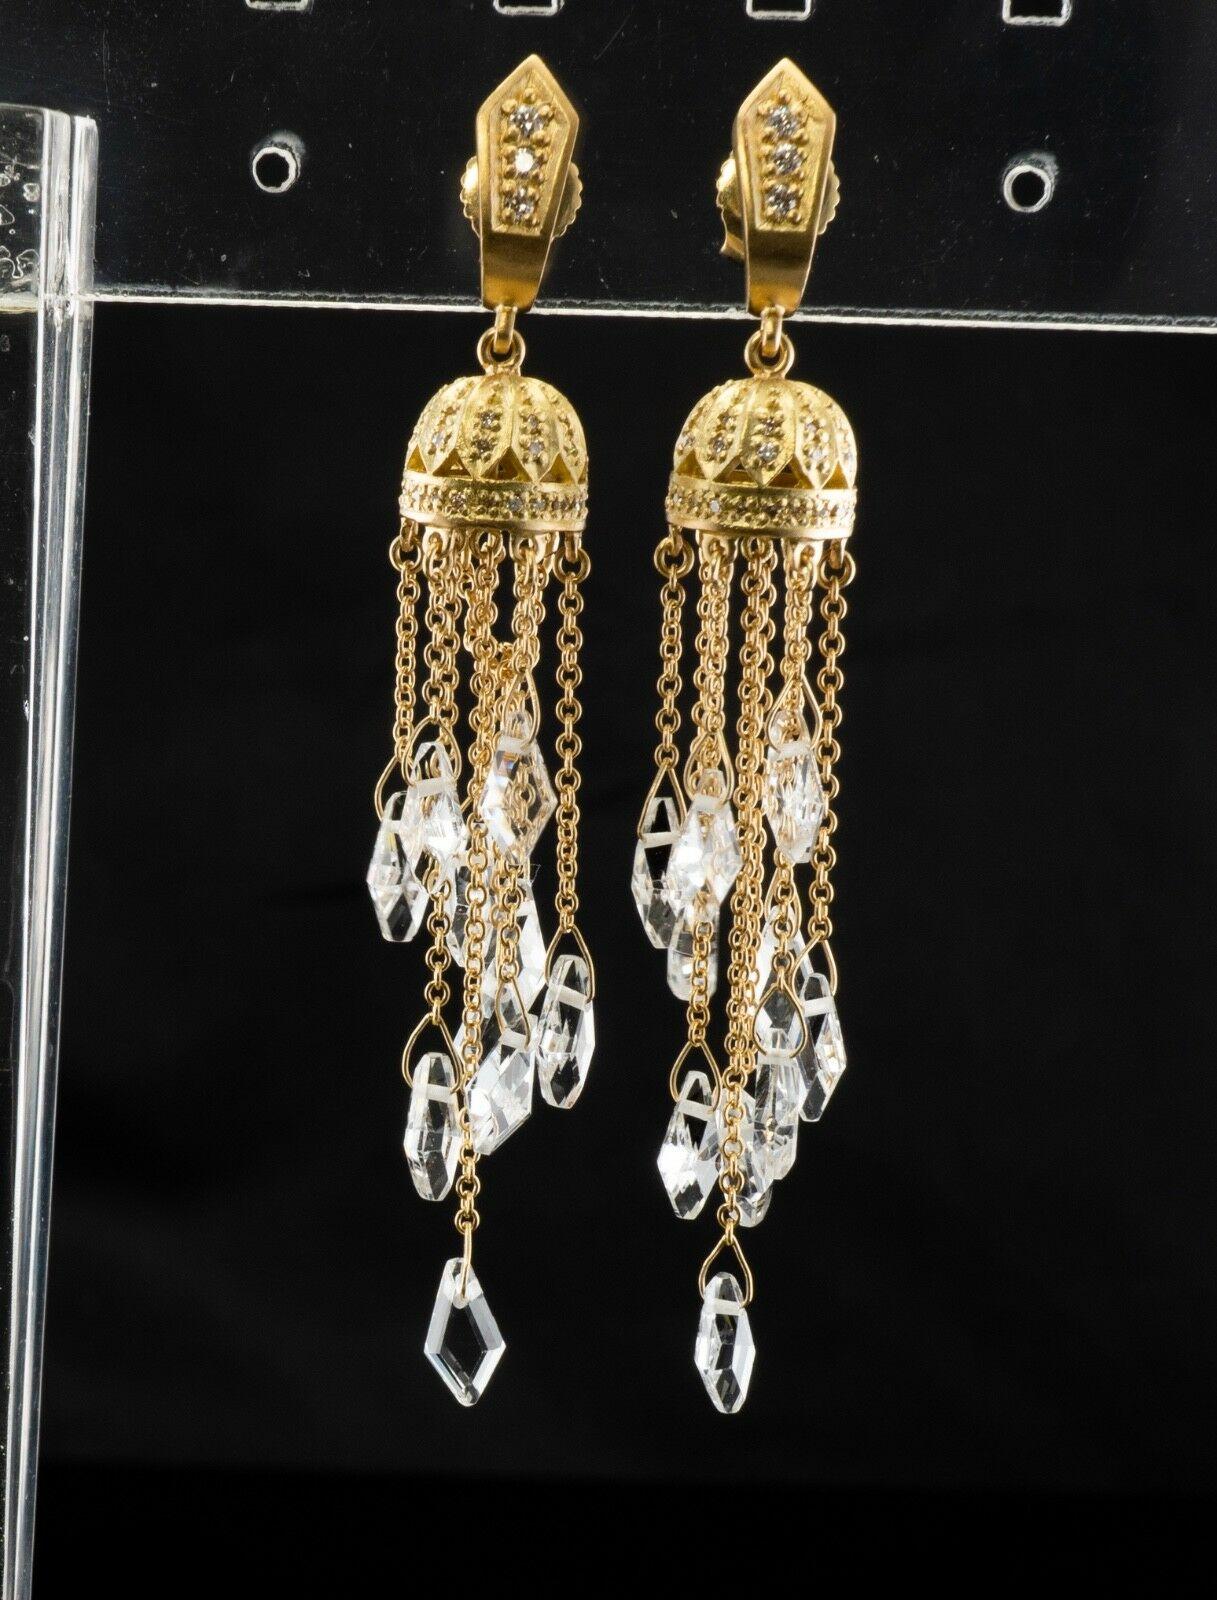 Quartz Crystal Herkimer  Earrings Dangle Drop Long

The dangle genuine cleanest and clearest Quartz (also called Herkimer diamonds) measure approximately 5mm each, amazing gems! The top of the earrings is studded with 35 small but white and fiery